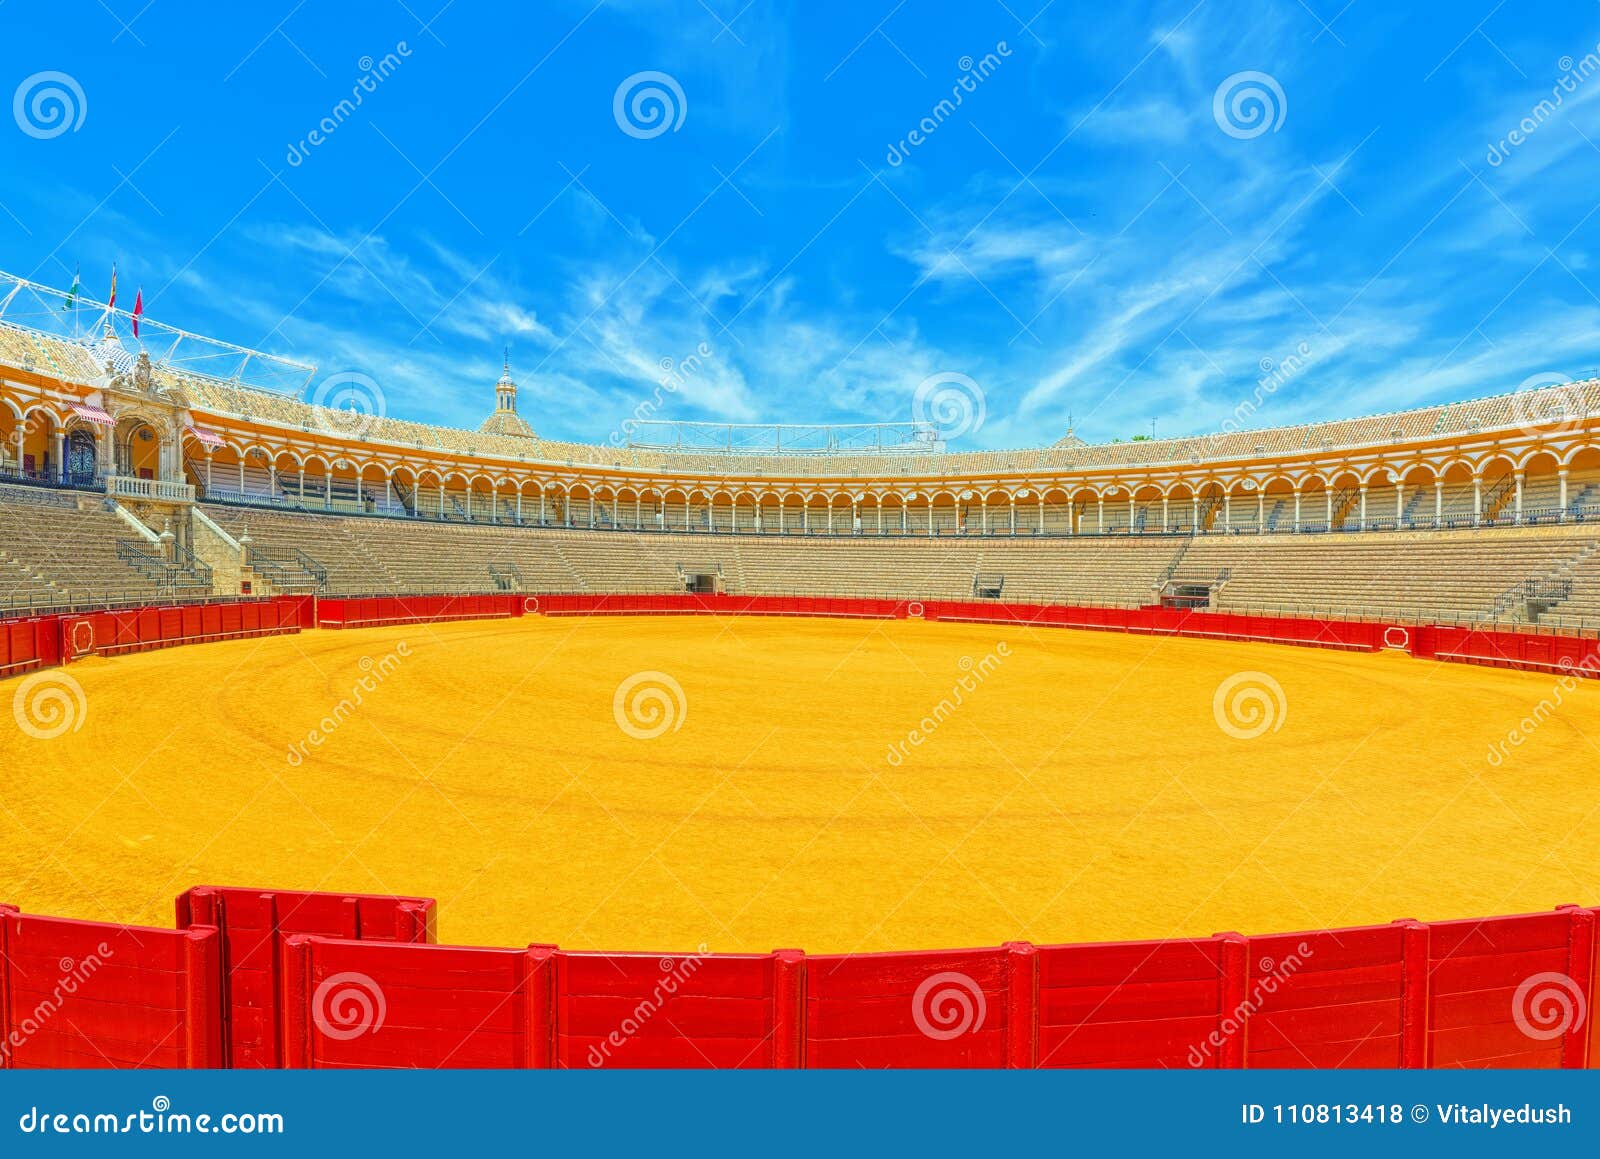 indoor view of square of bulls royal maestranza of cavalry in se